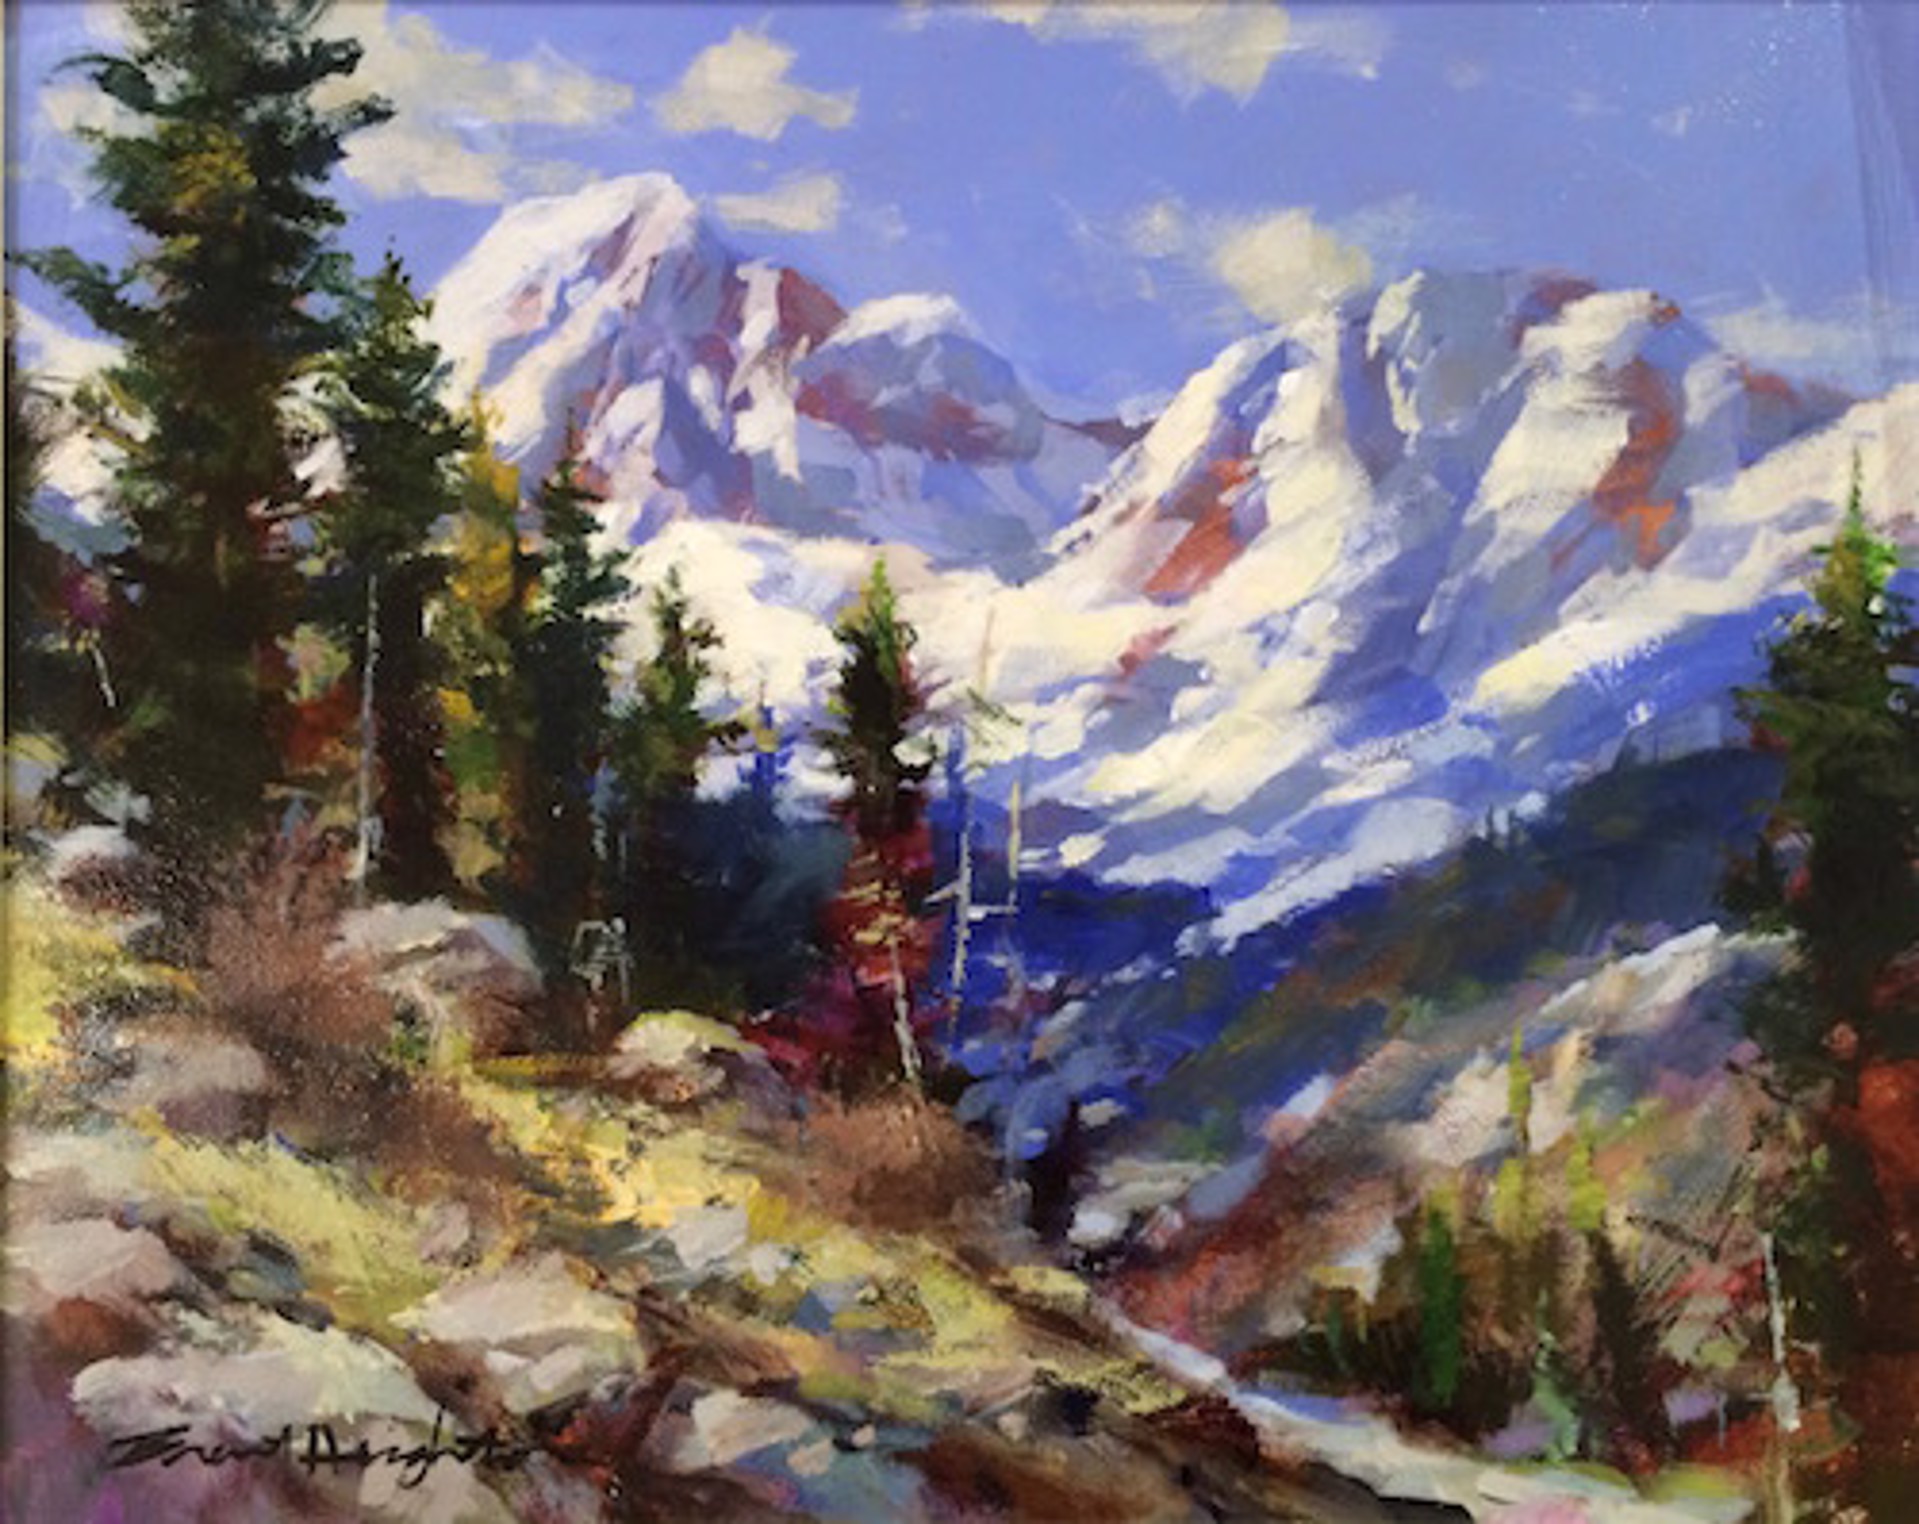 A Distant Valley by Brent Heighton